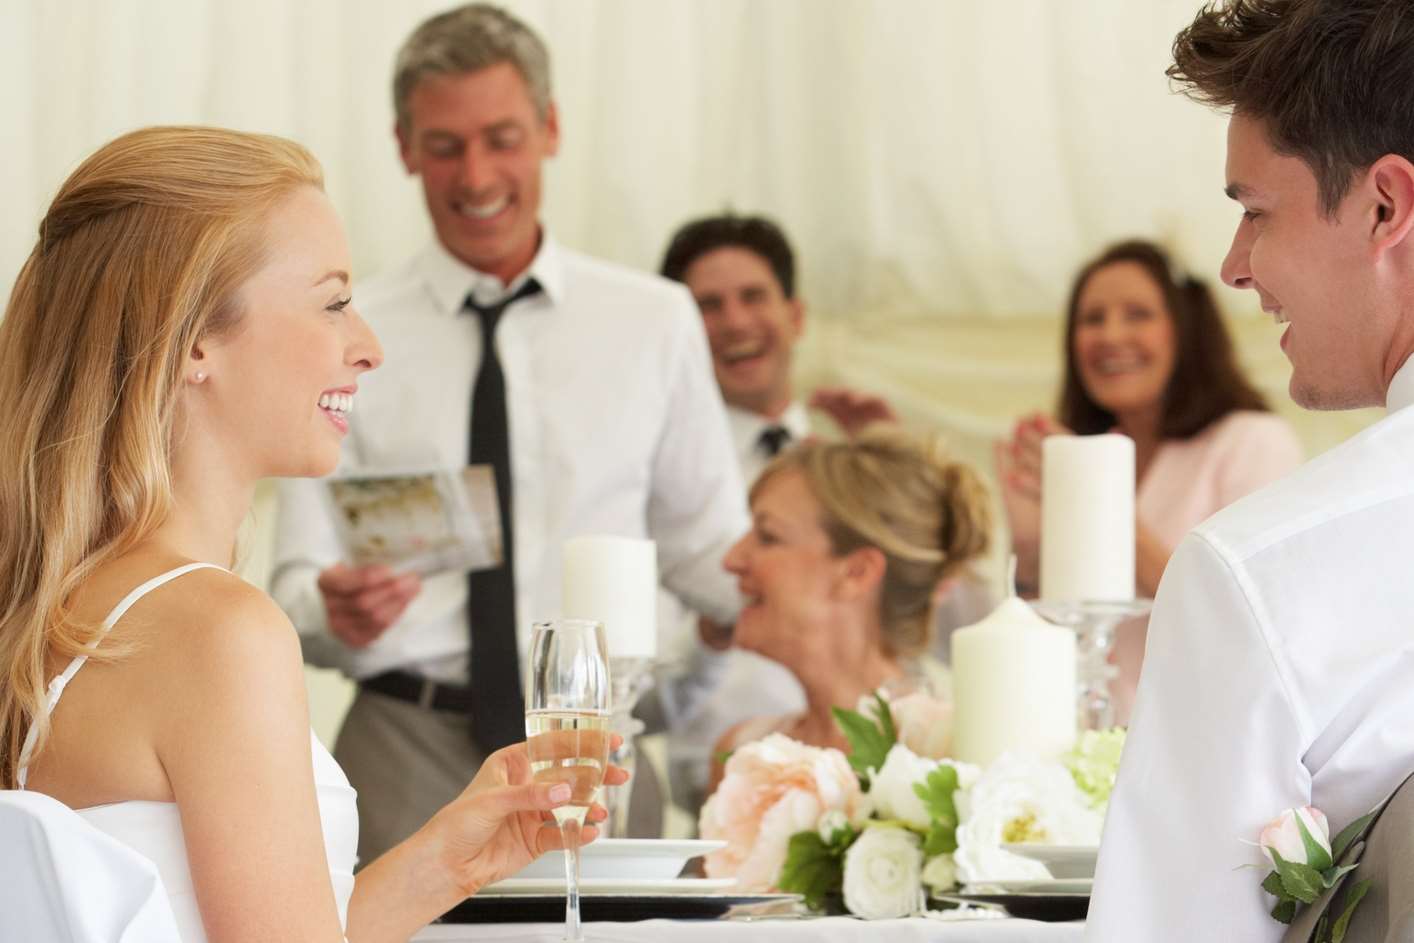 It's important to remember the bride and all her family will be all ears on your speech